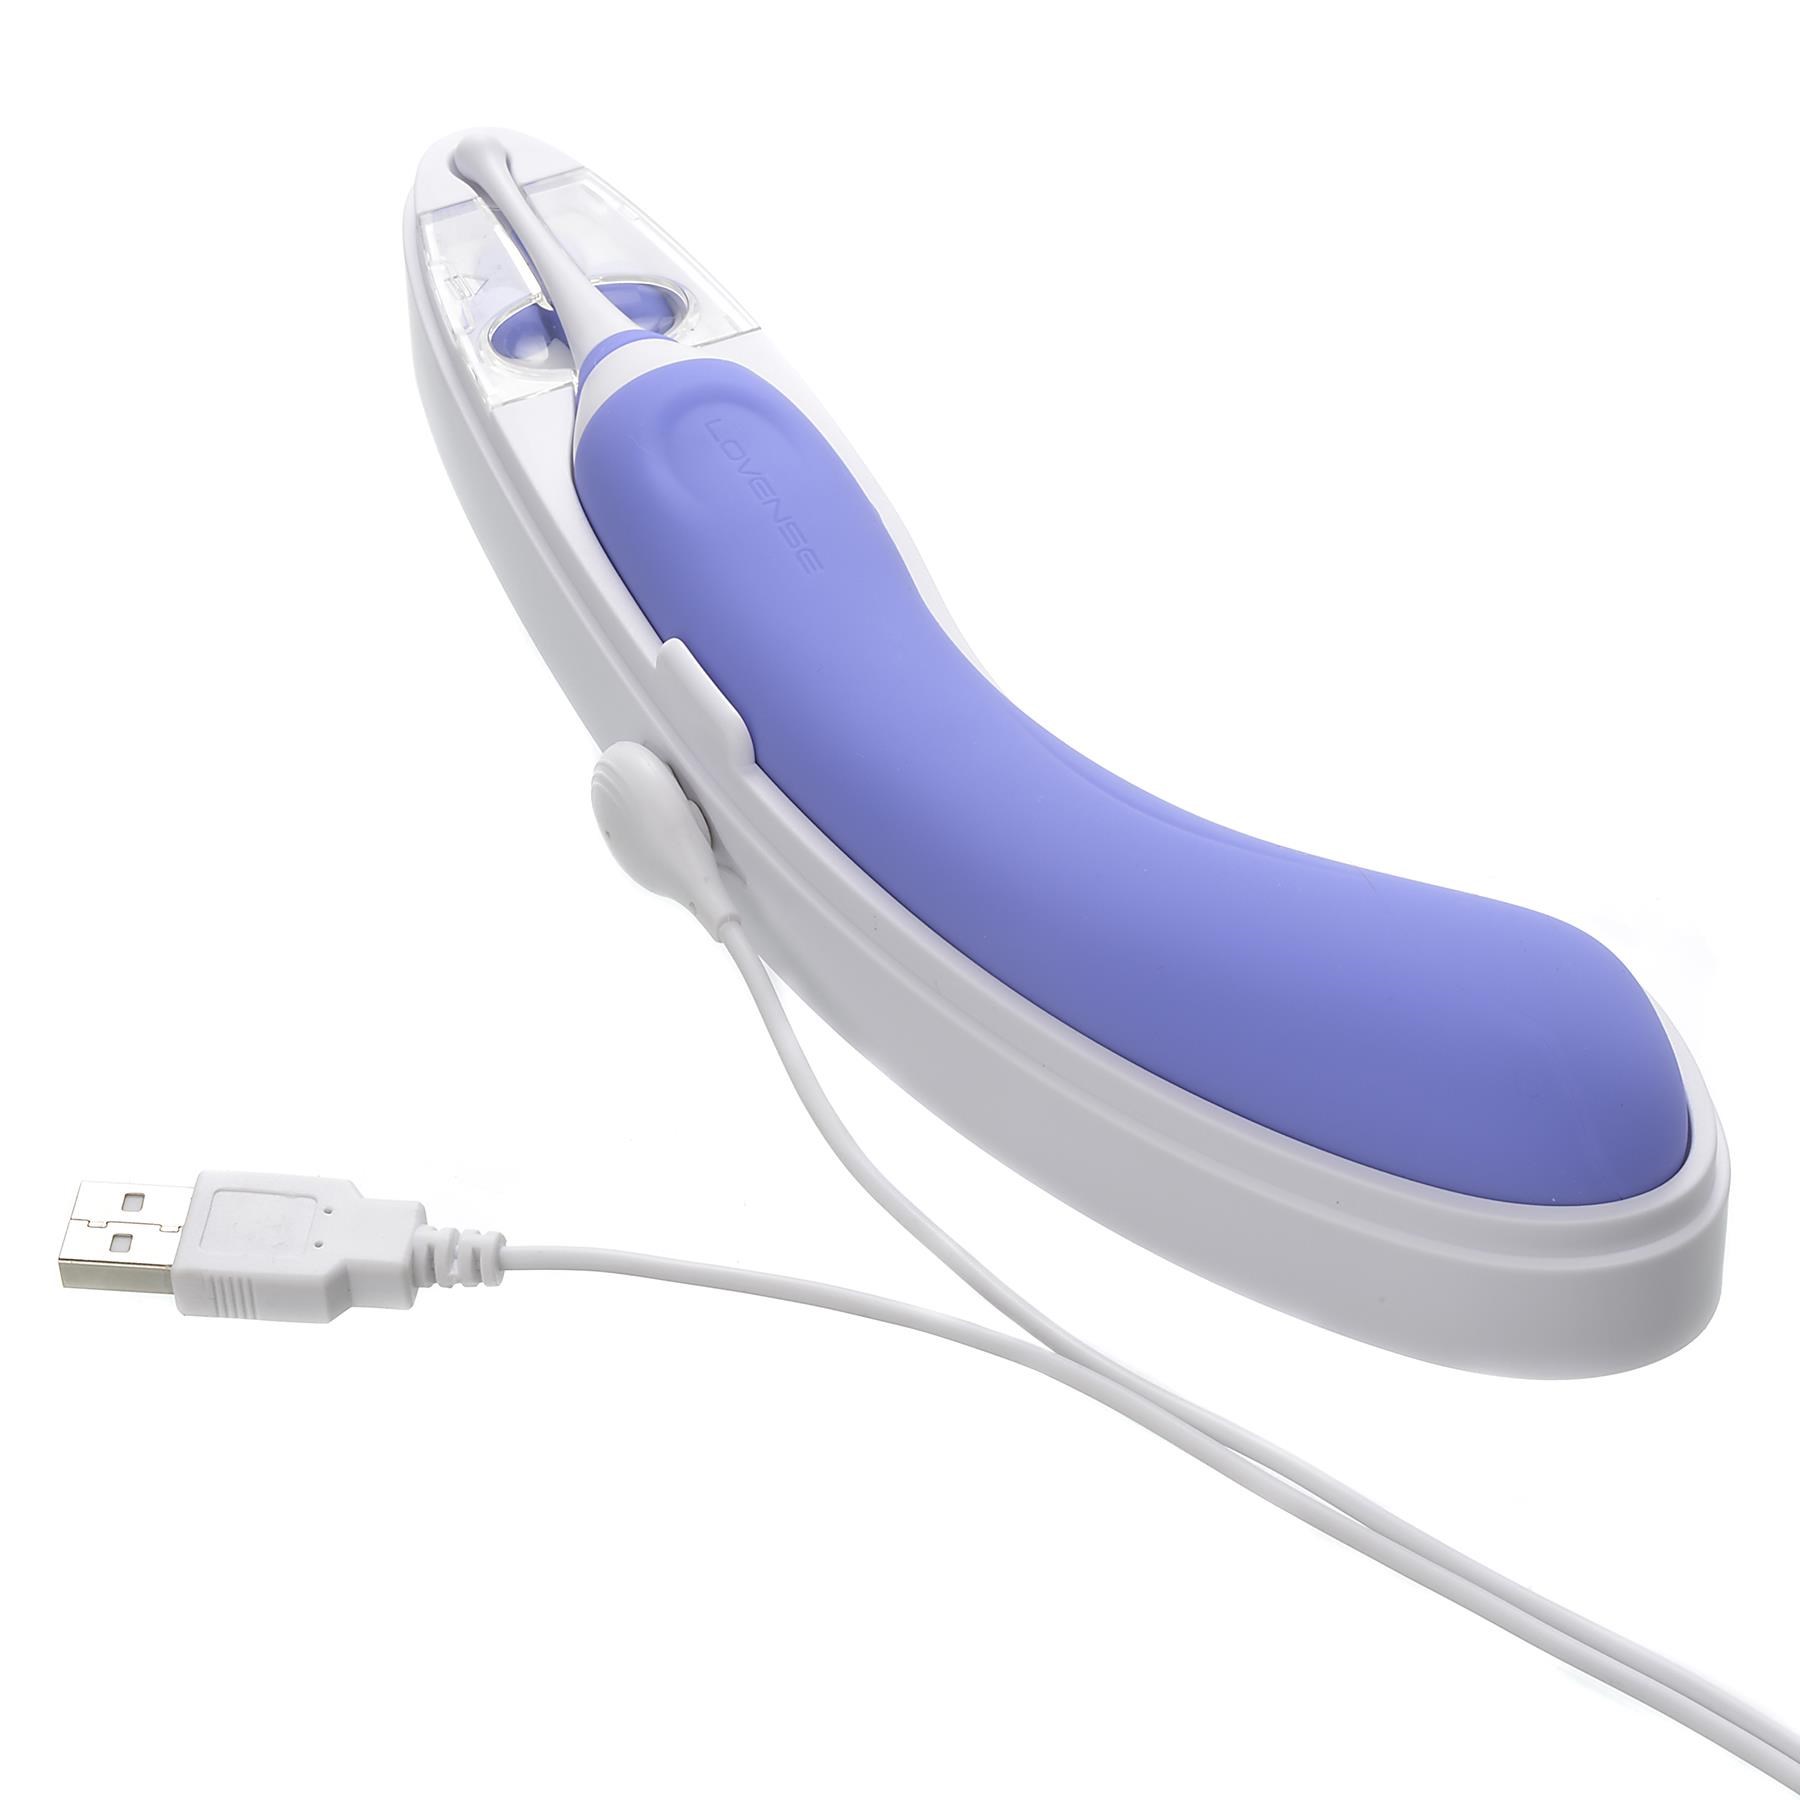 Lovense Hyphy Bluetooth Dual End Vibrator- Showing Where Charging Cable is Placed